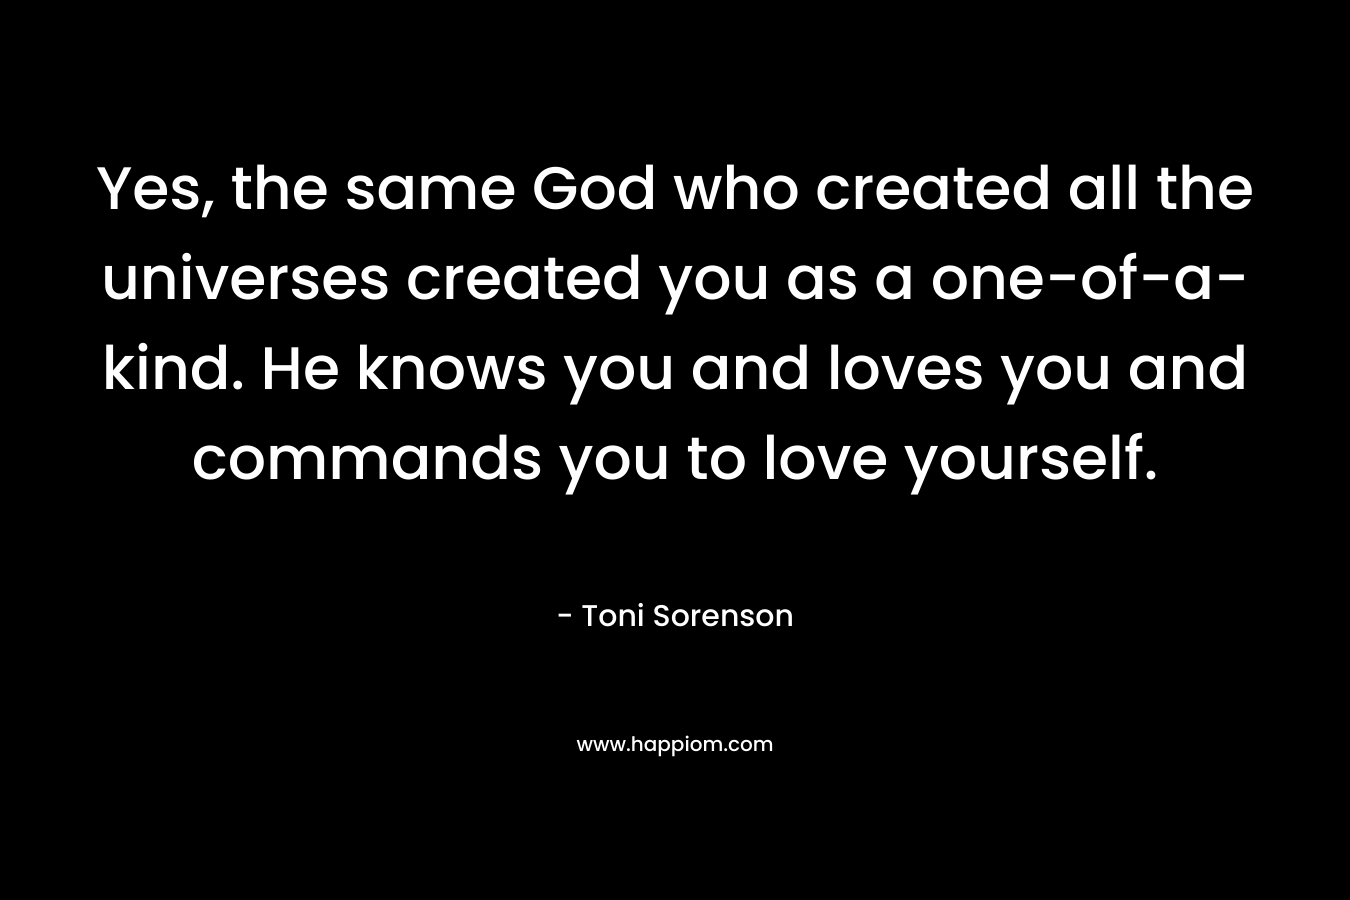 Yes, the same God who created all the universes created you as a one-of-a-kind. He knows you and loves you and commands you to love yourself. – Toni Sorenson